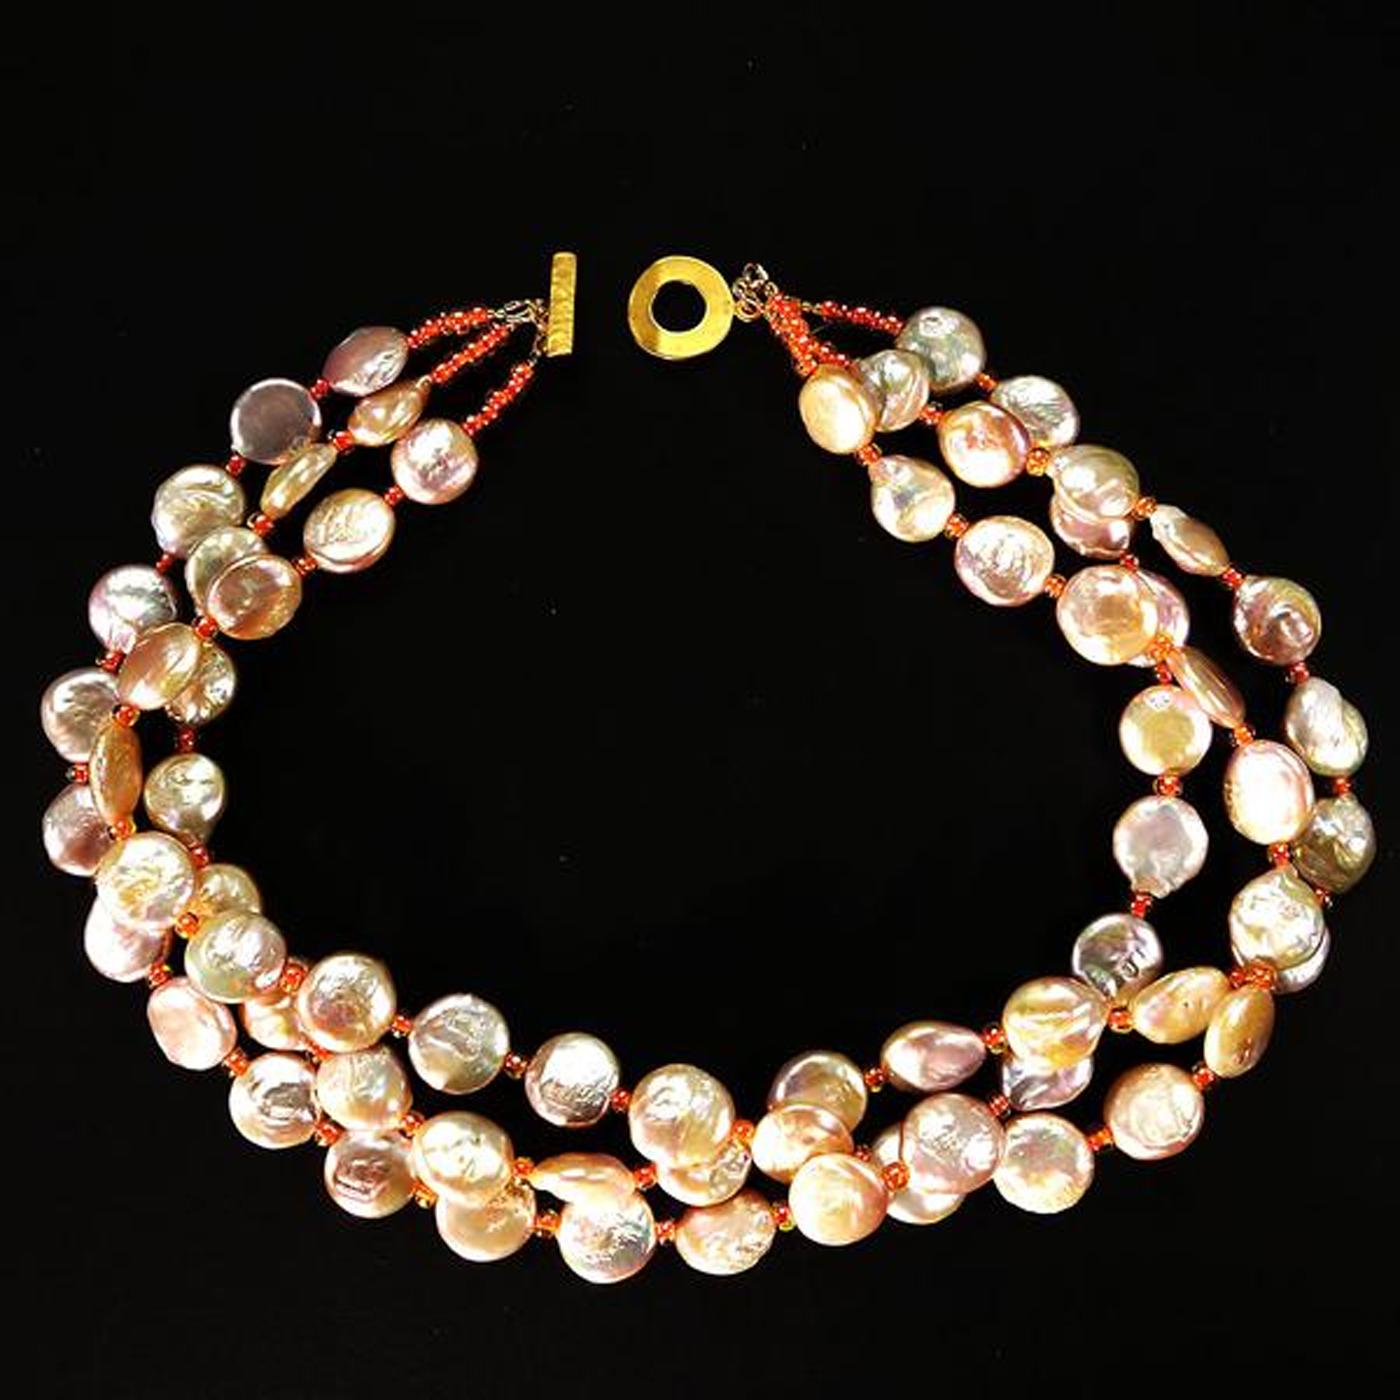 Artisan AJD Triple Strand Coin Pearl Necklace in Peachy/Pink June Birthstone  Great Gift